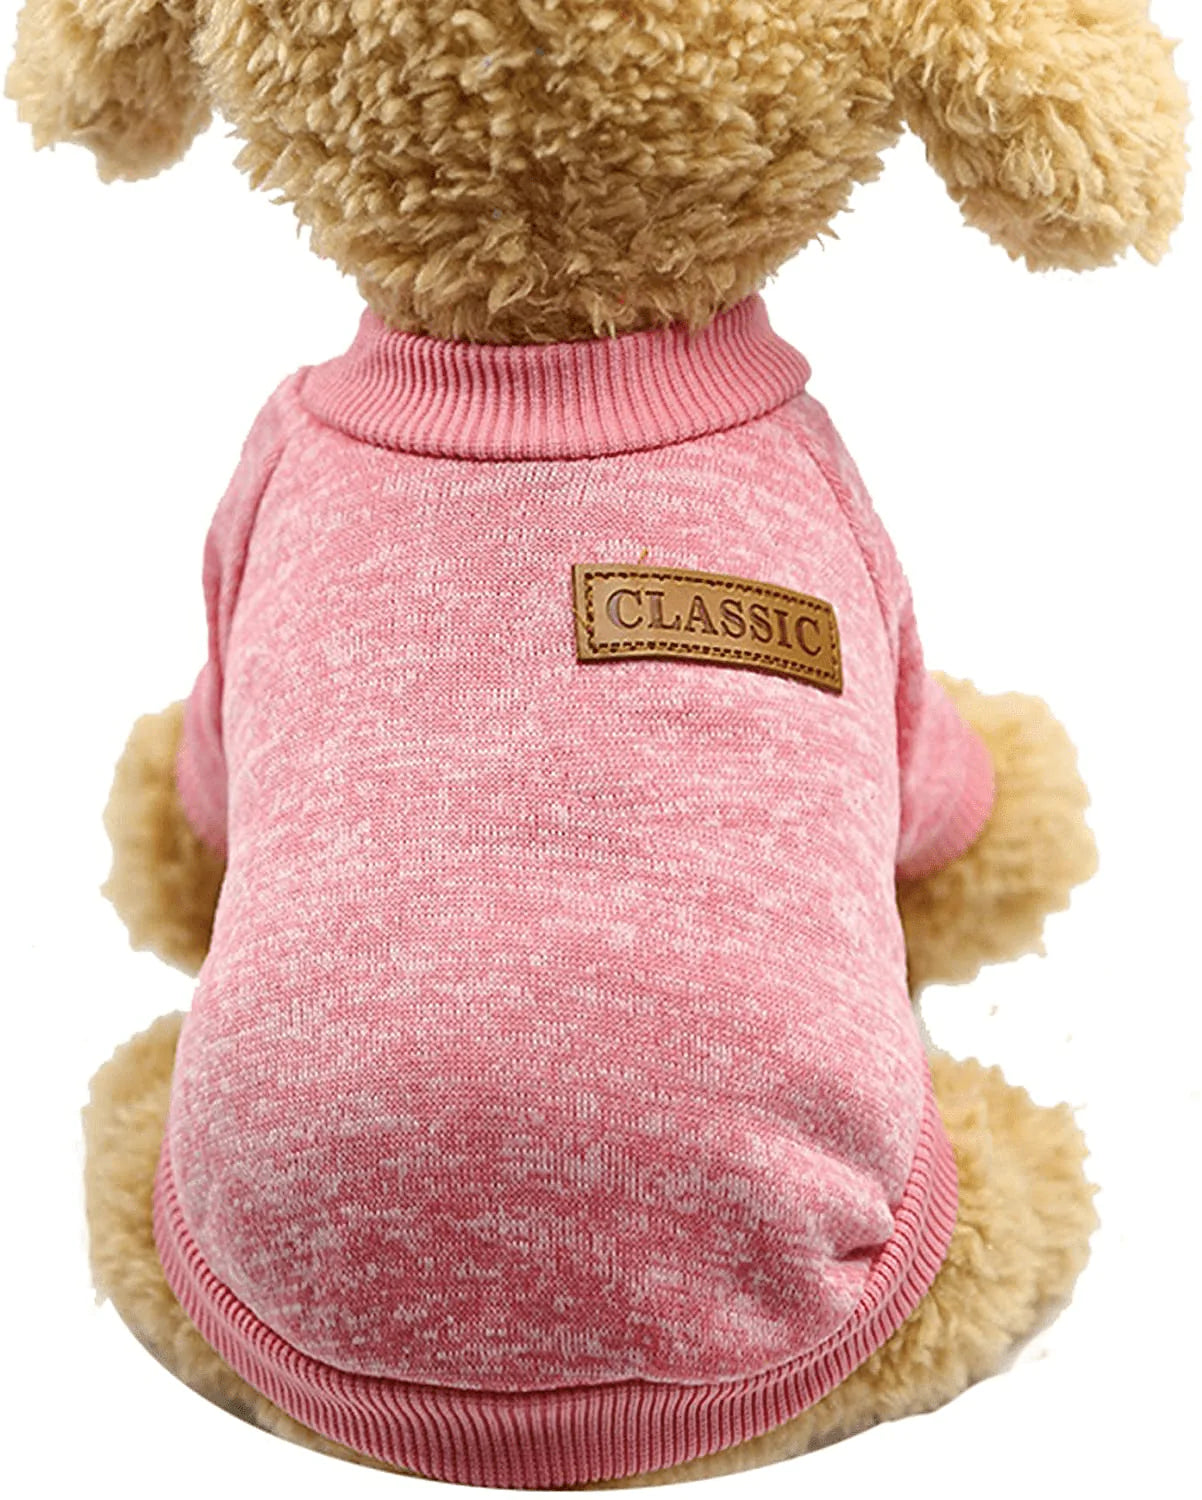 YAODHAOD Dog Sweater Winter Pet Dog Clothes Knitwear Soft Thickening Warm Pup Dogs Sweatshirt Coat for Small Dog Puppy Kitten Cat Animals & Pet Supplies > Pet Supplies > Cat Supplies > Cat Apparel YAODHAOD Pink Medium 